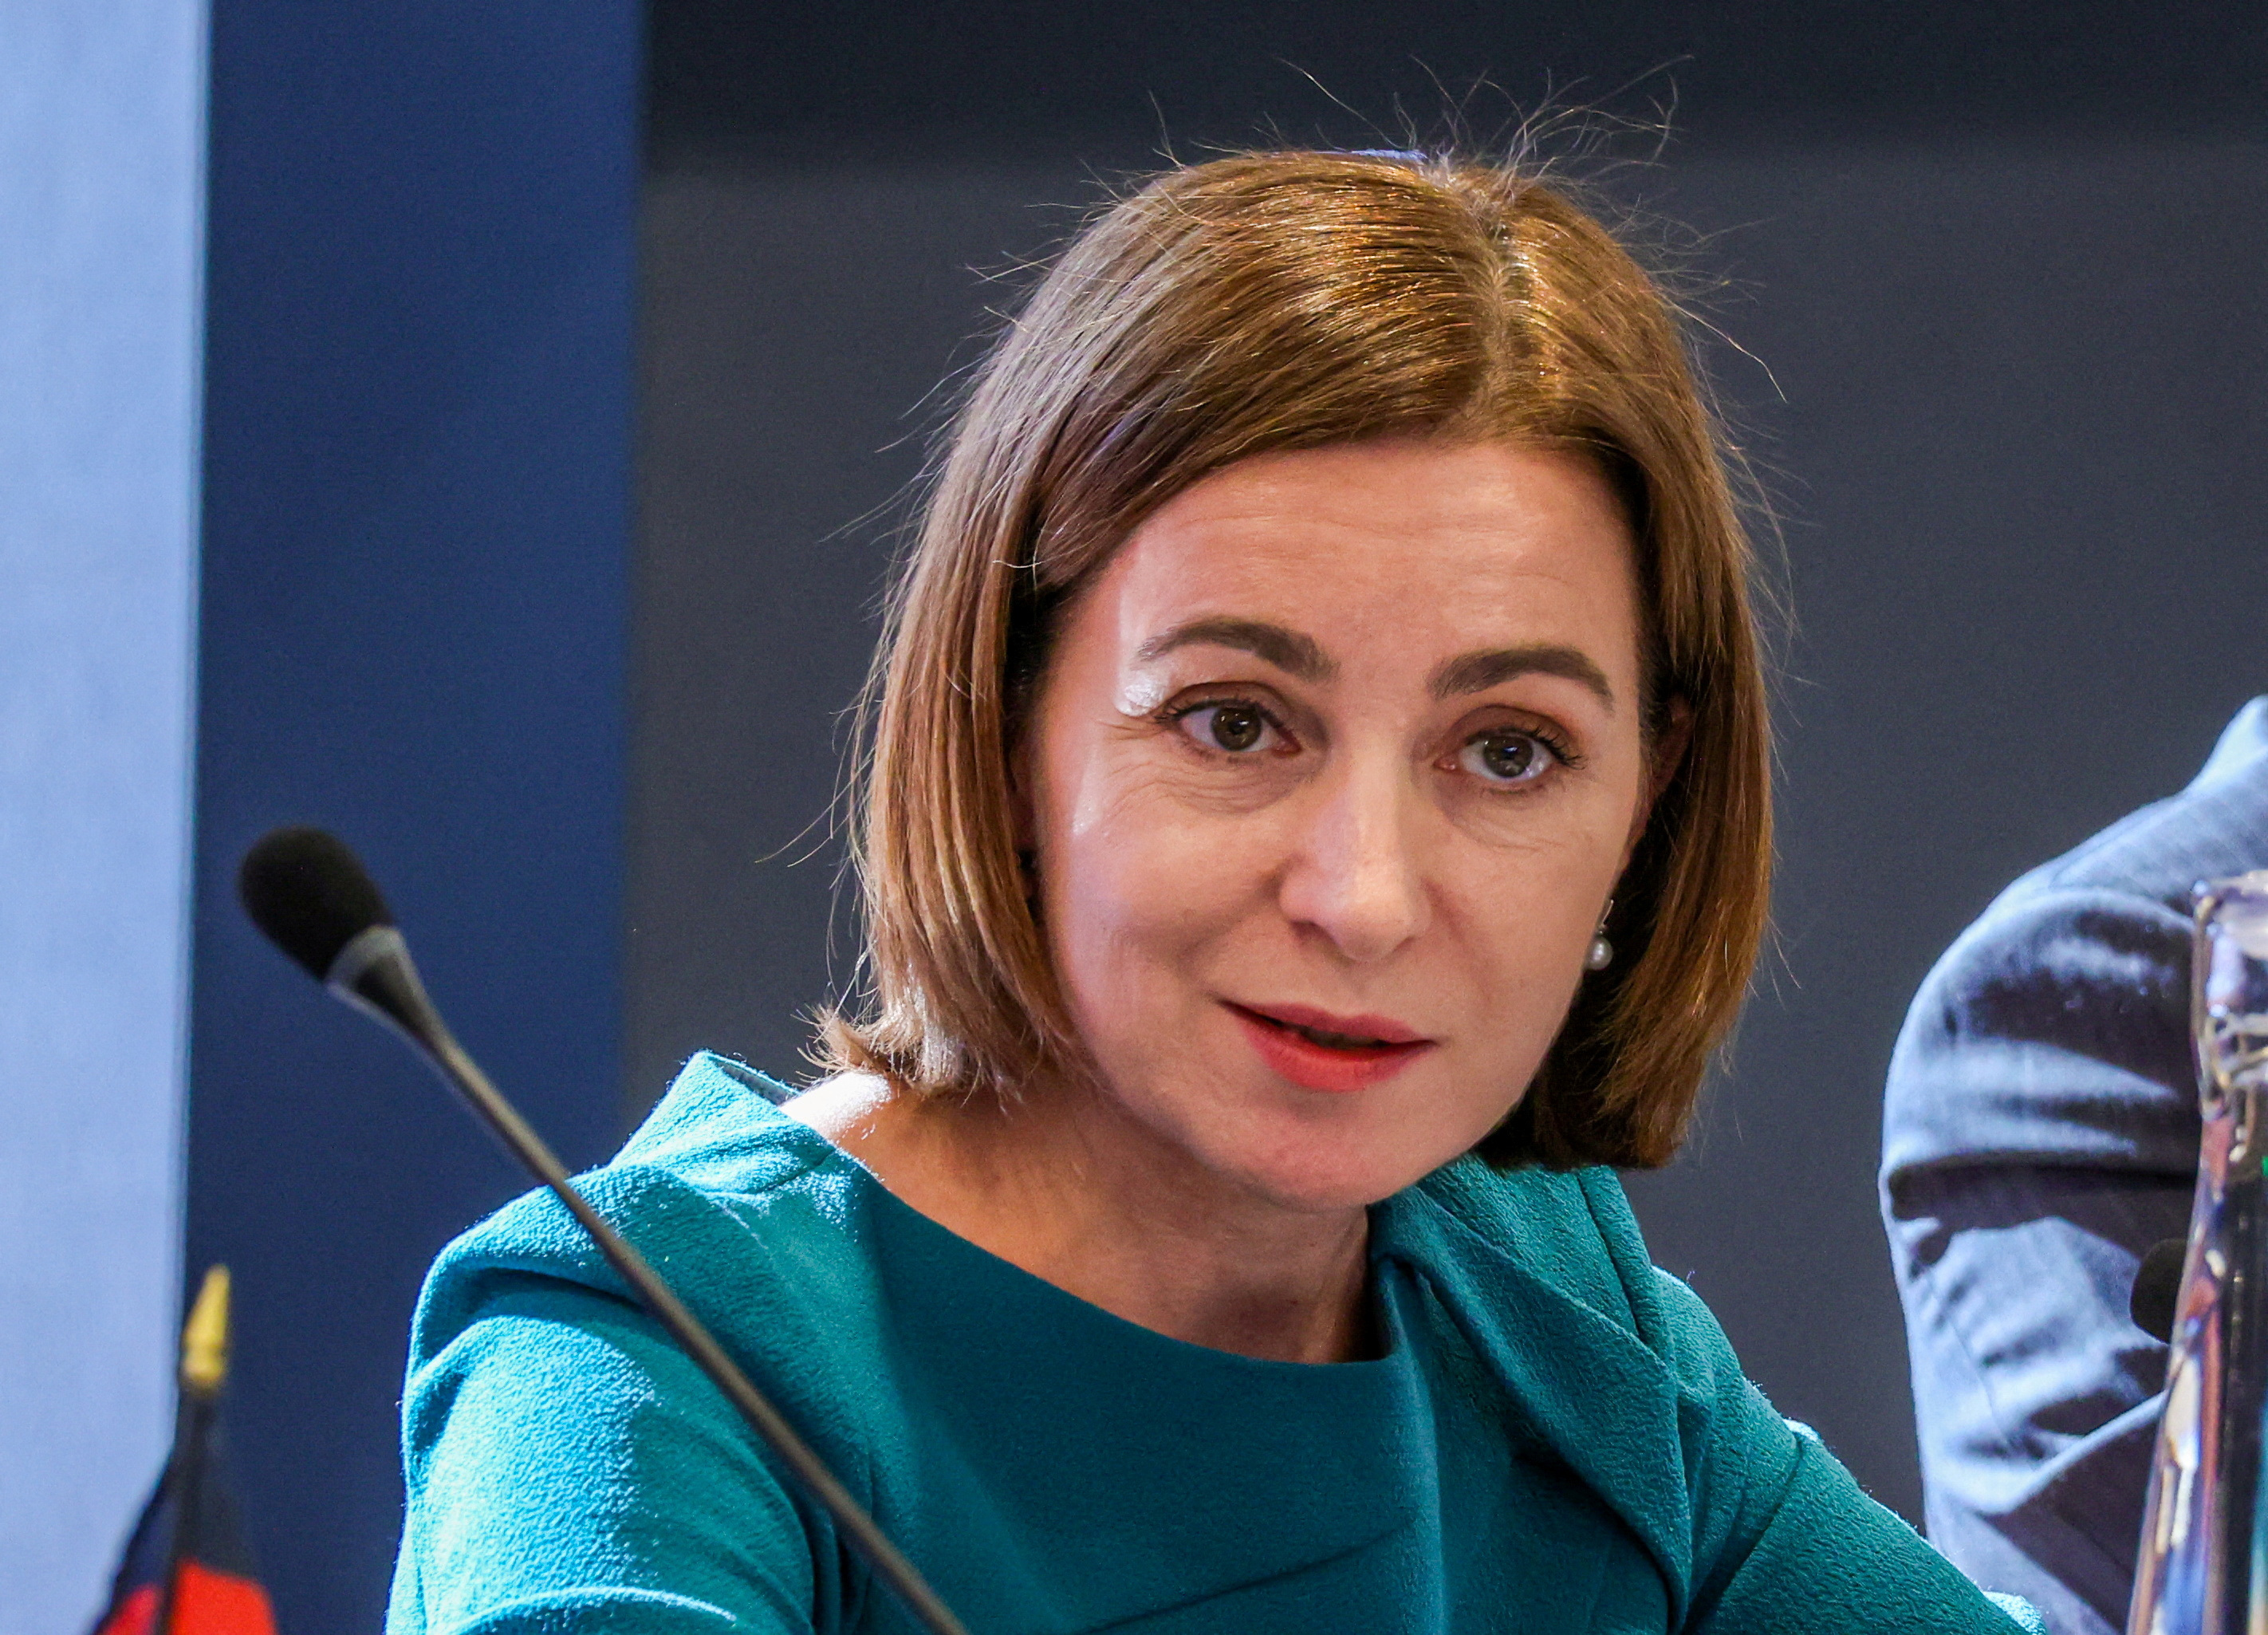 Moldovan President Maia Sandu speaks at the USAID "Democracy Delivers" event at the Ford Foundation Center for Social Justice, in New York City